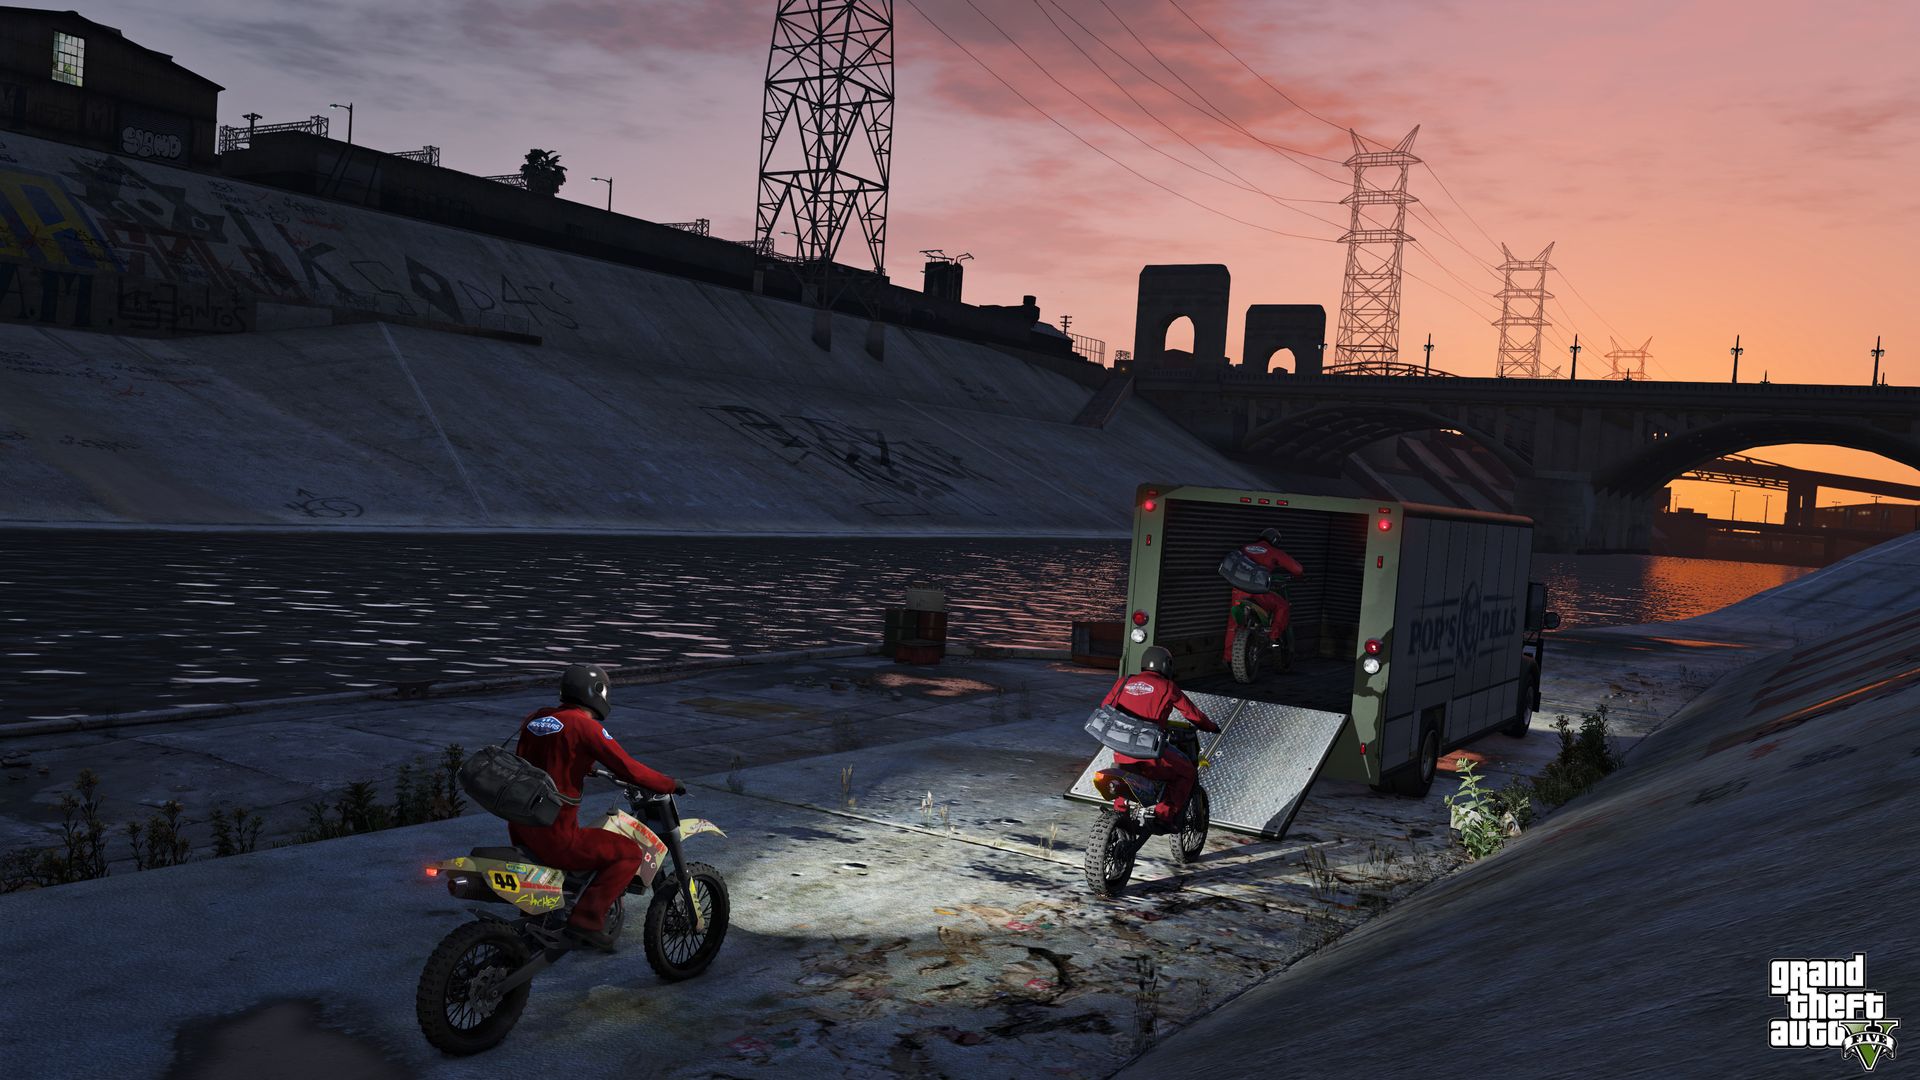 A screenshot of Grand Theft Auto 5 shows characters riding motorcycles into the back of a truck